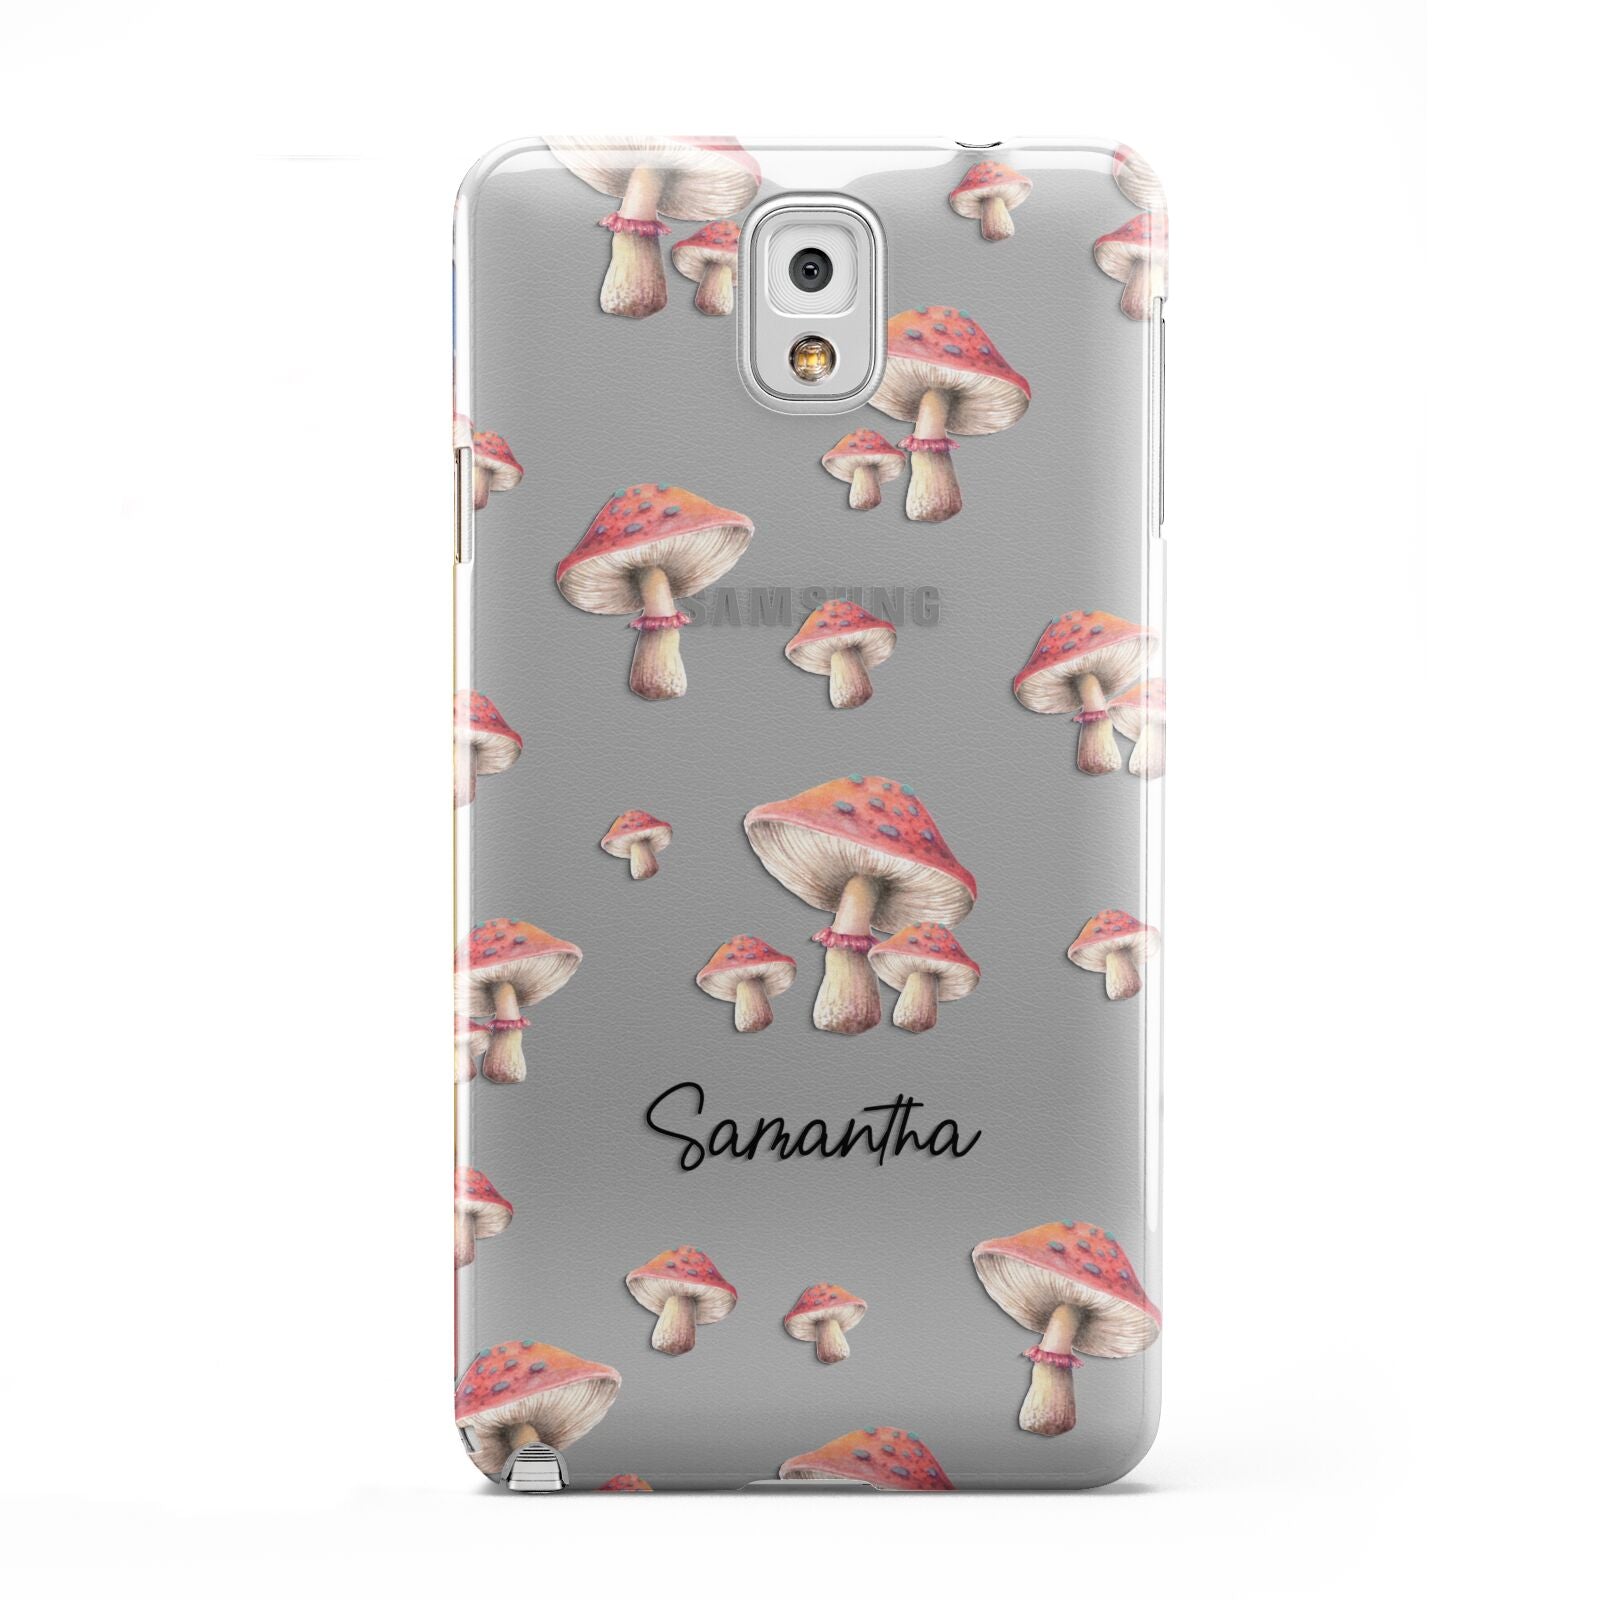 Mushroom Illustrations with Name Samsung Galaxy Note 3 Case